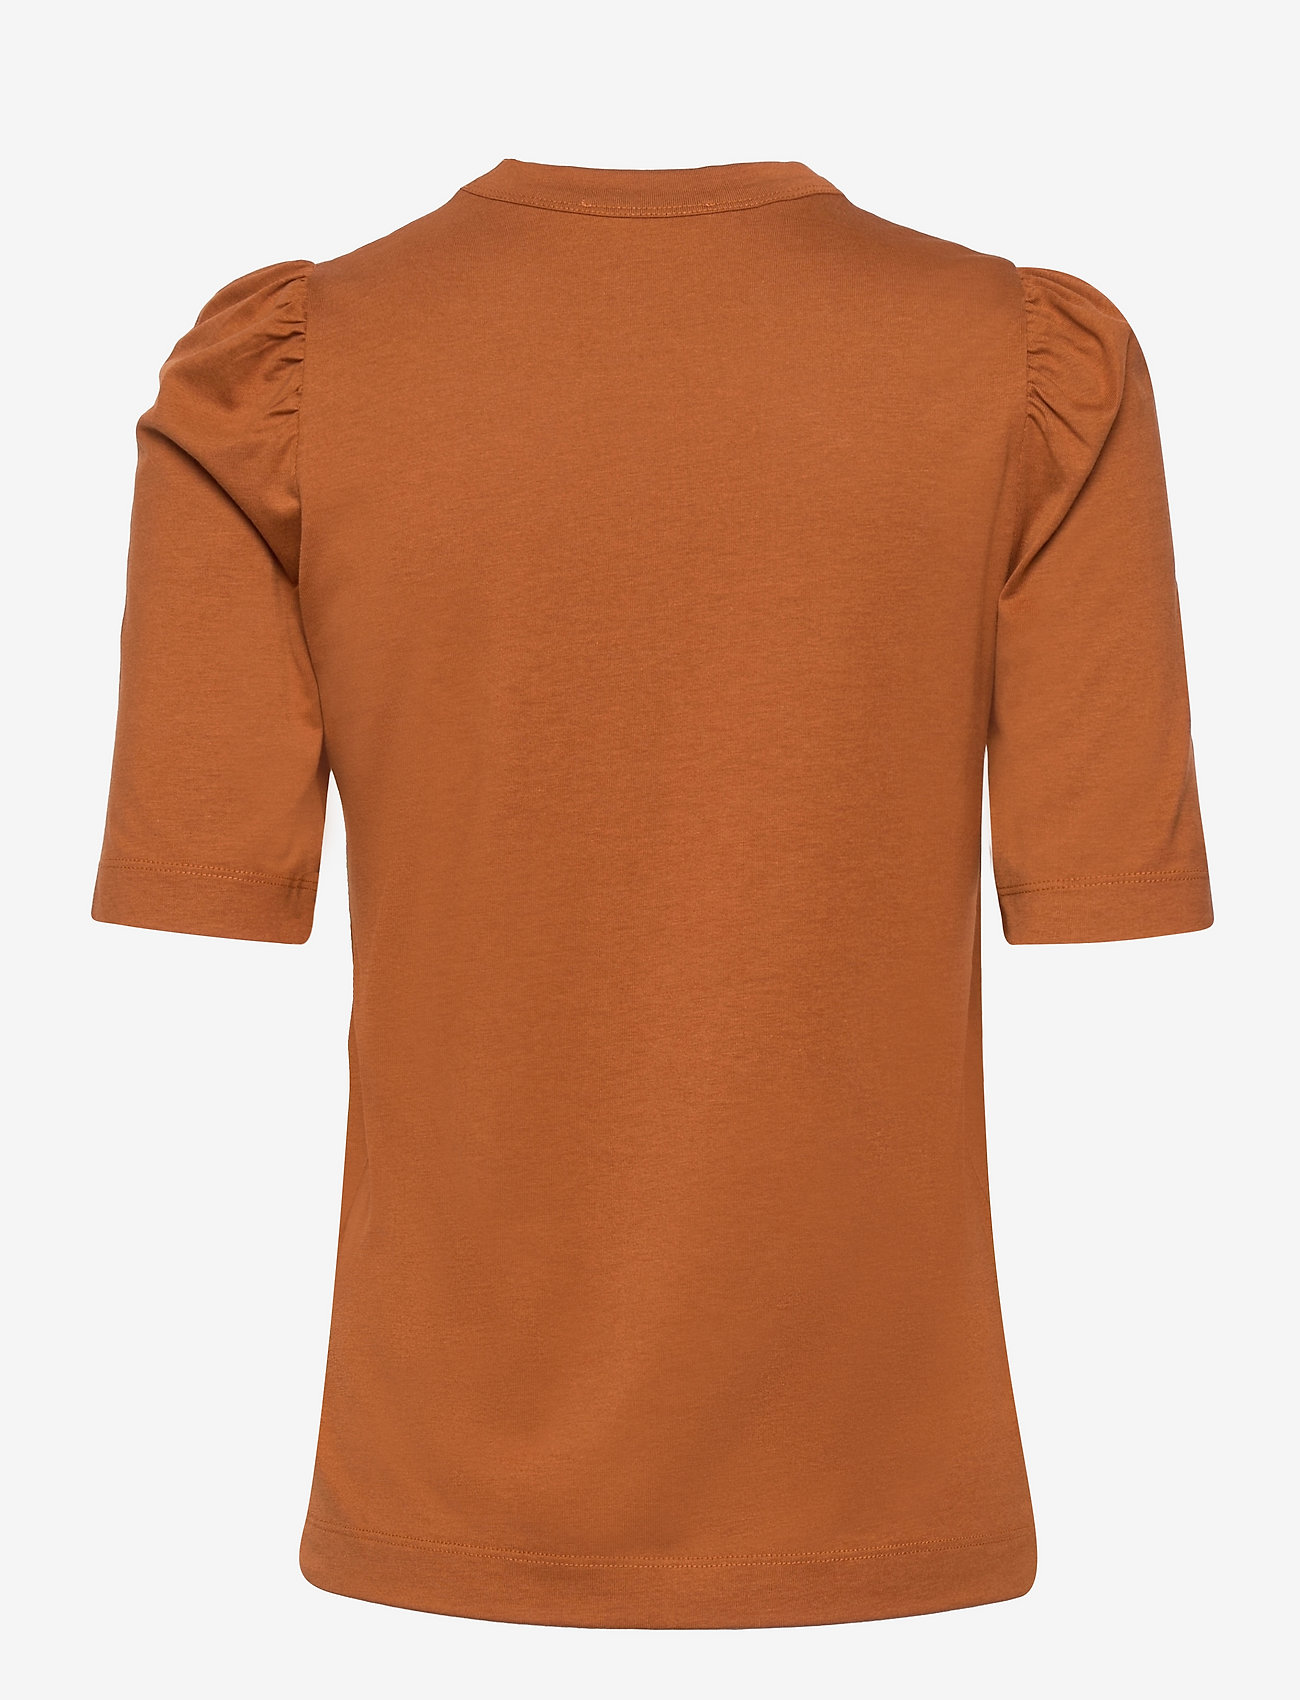 RODEBJER - RODEBJER DORY - t-shirts - pecan - 1